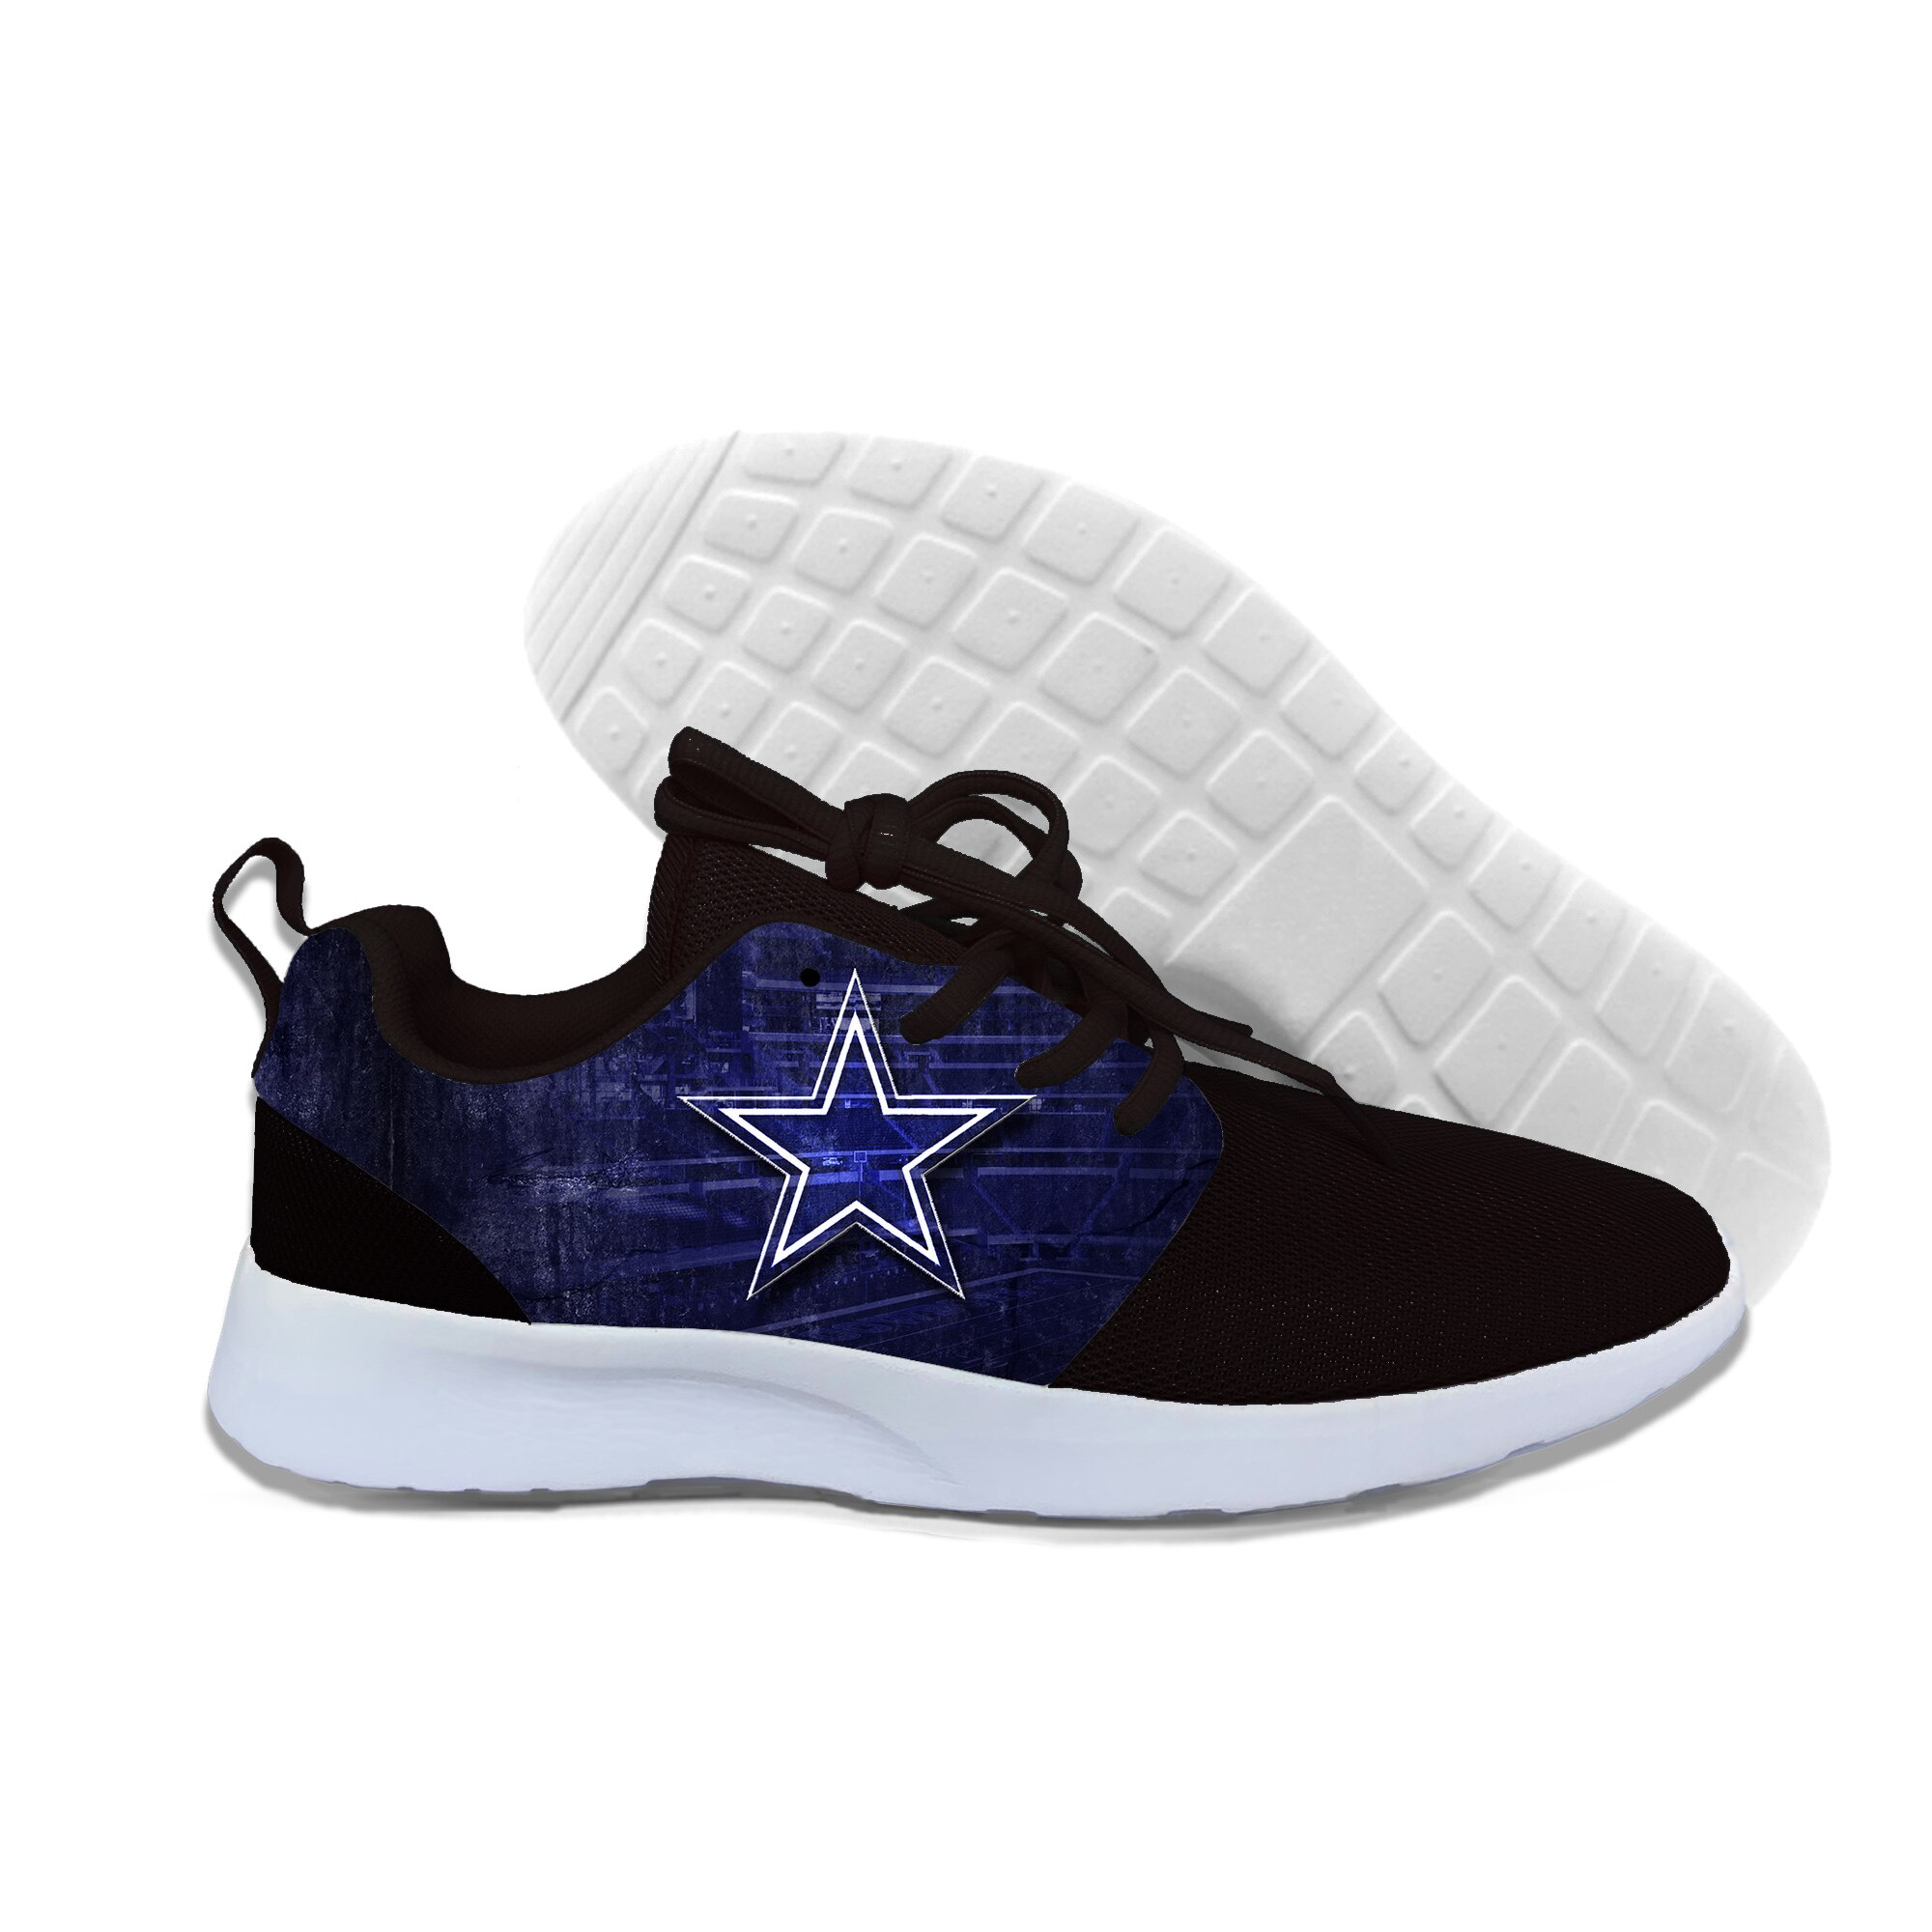 Novelty Design Summer Walking Breathable Shoes Football Dallas DC Shoes Black Light Weight Outdoor Walking Sneakers Men